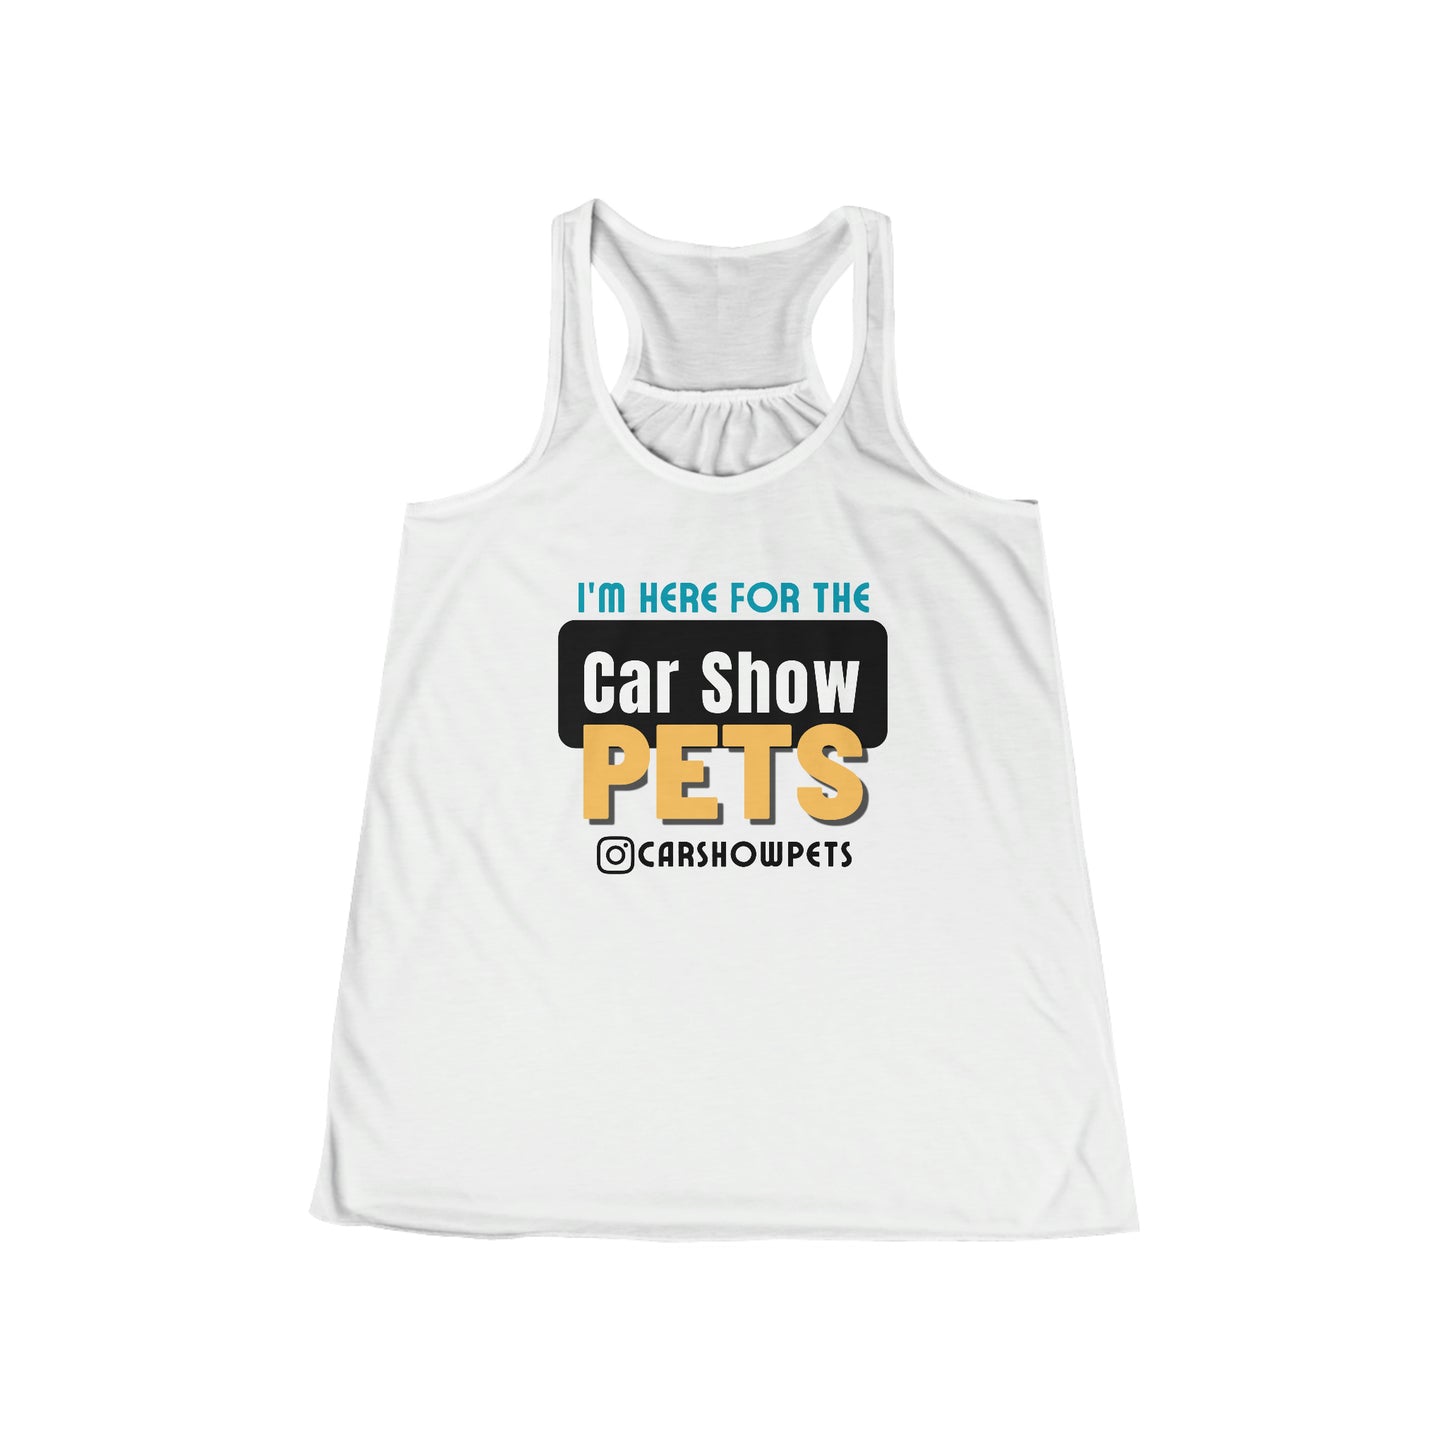 Here for the Car Show Pets Women's Flowy Racerback Tank